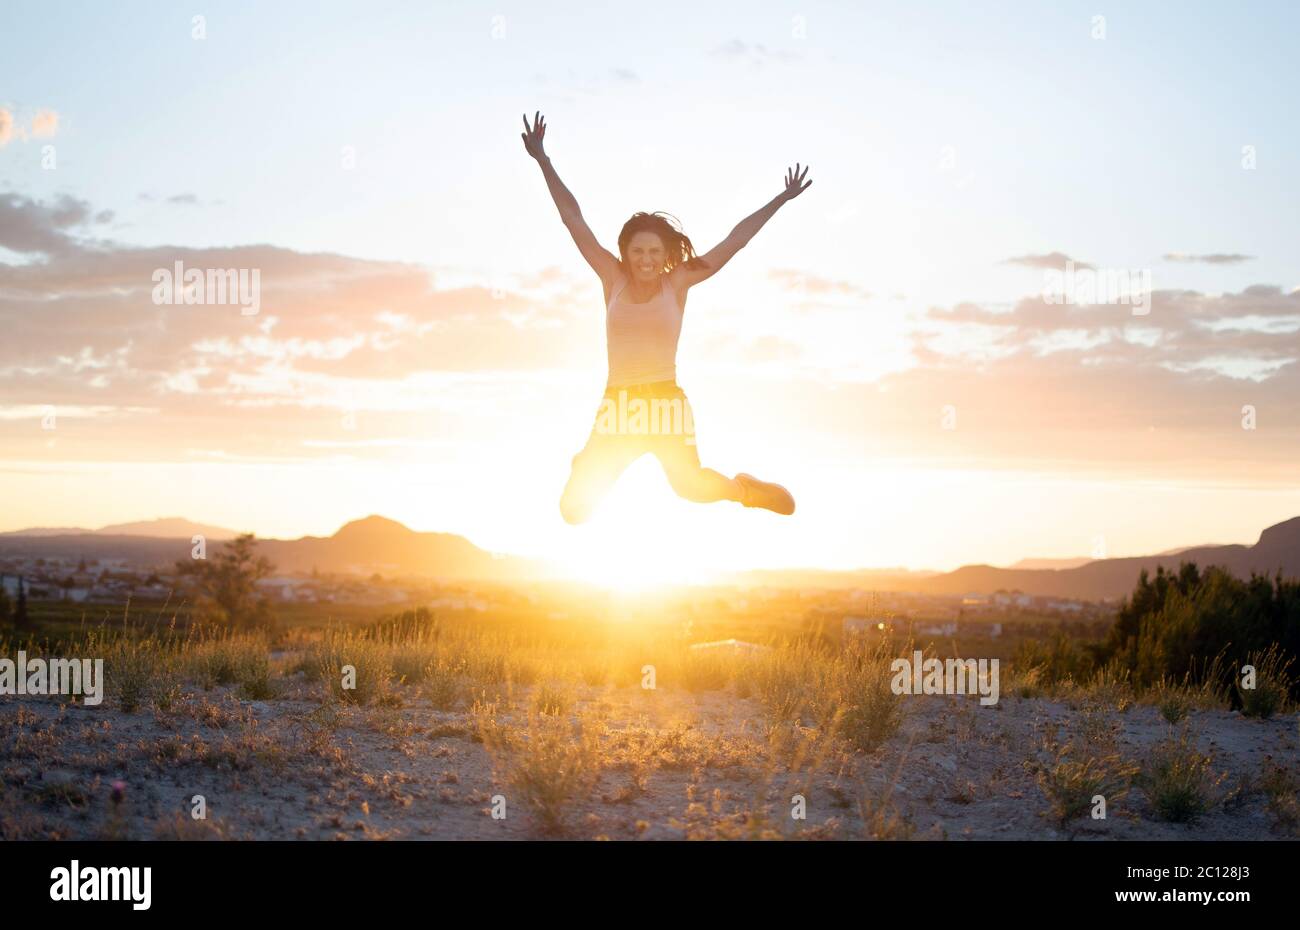 https://c8.alamy.com/comp/2C128J3/athletic-young-girl-jumping-freely-at-mountain-top-against-sunset-in-murcia-spain-doing-exercise-work-out-training-attractive-fit-healthy-woman-in-2C128J3.jpg